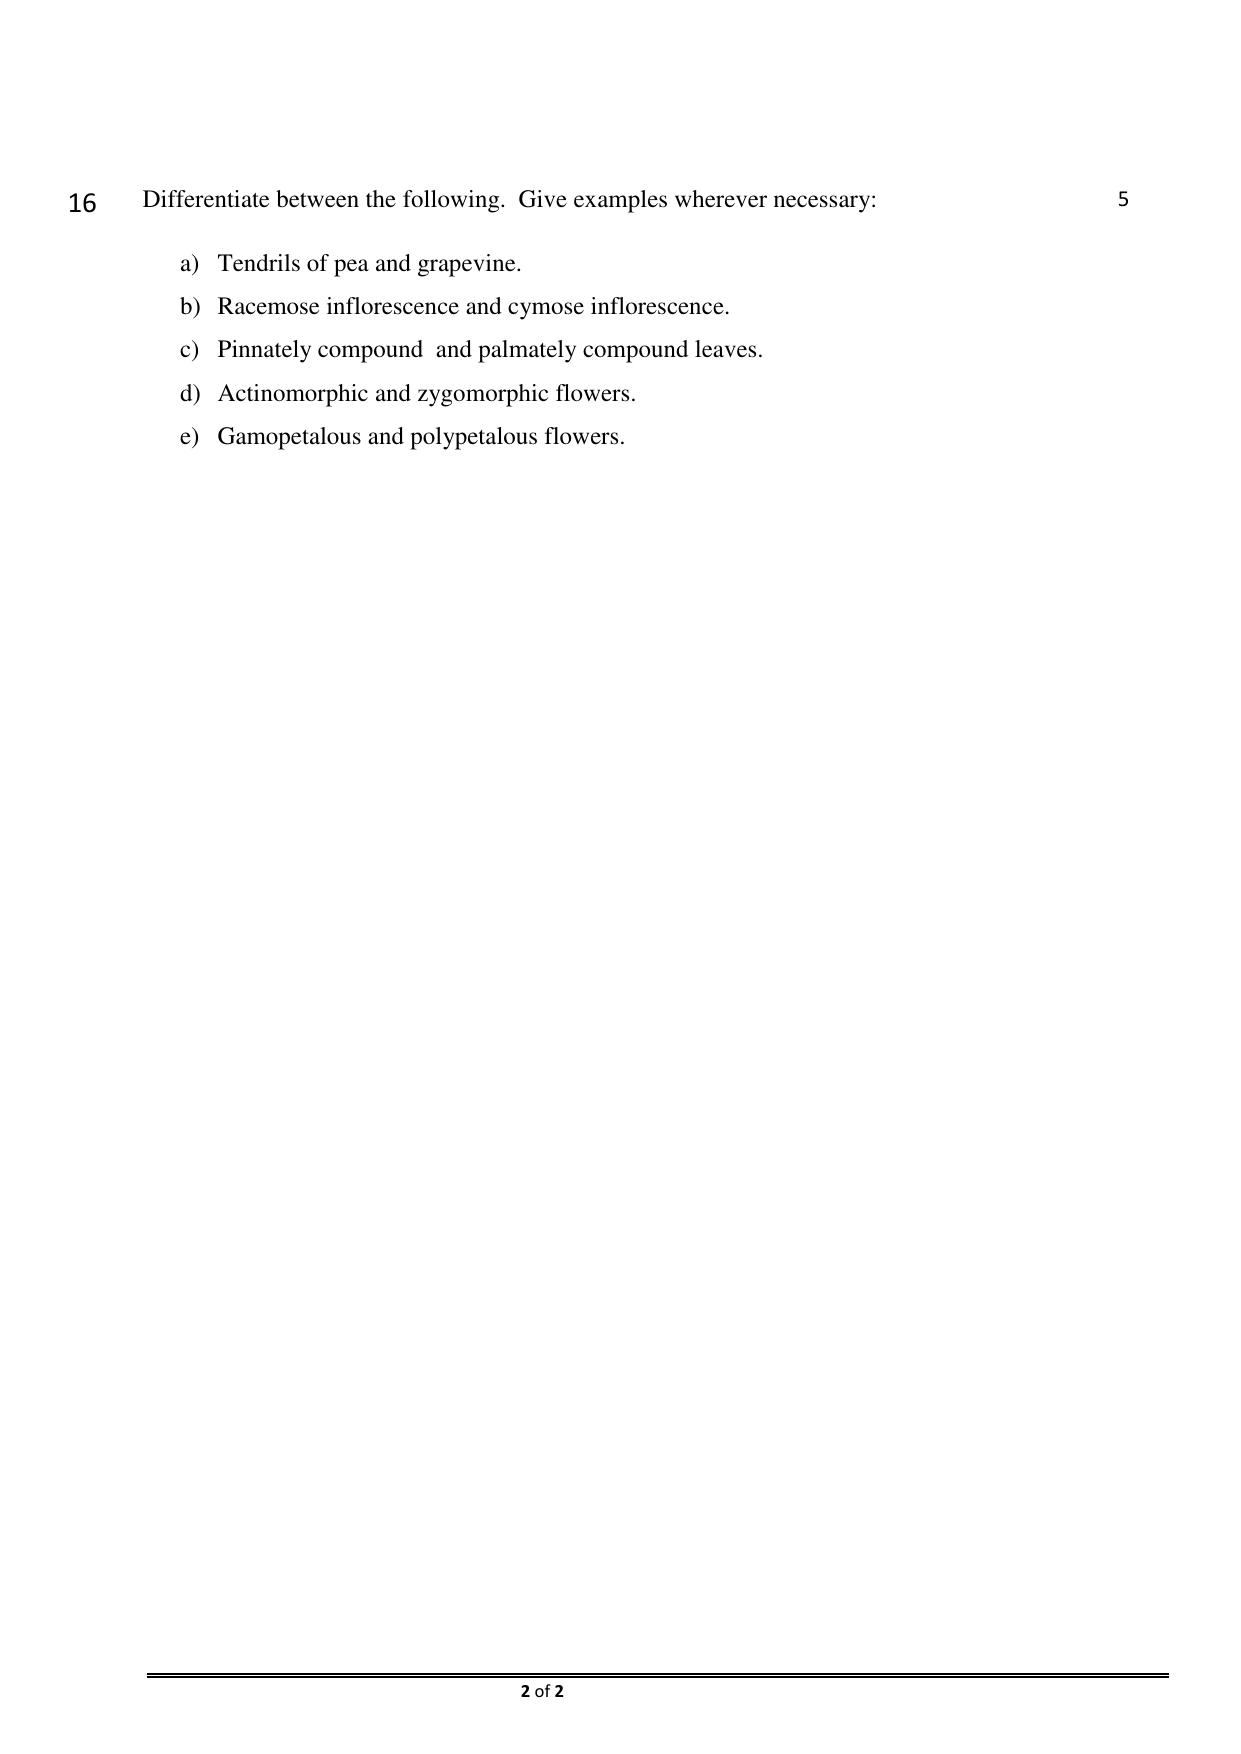 CBSE Worksheets for Class 11 Biology Morphology in Flowering in Plants Assignment - Page 2